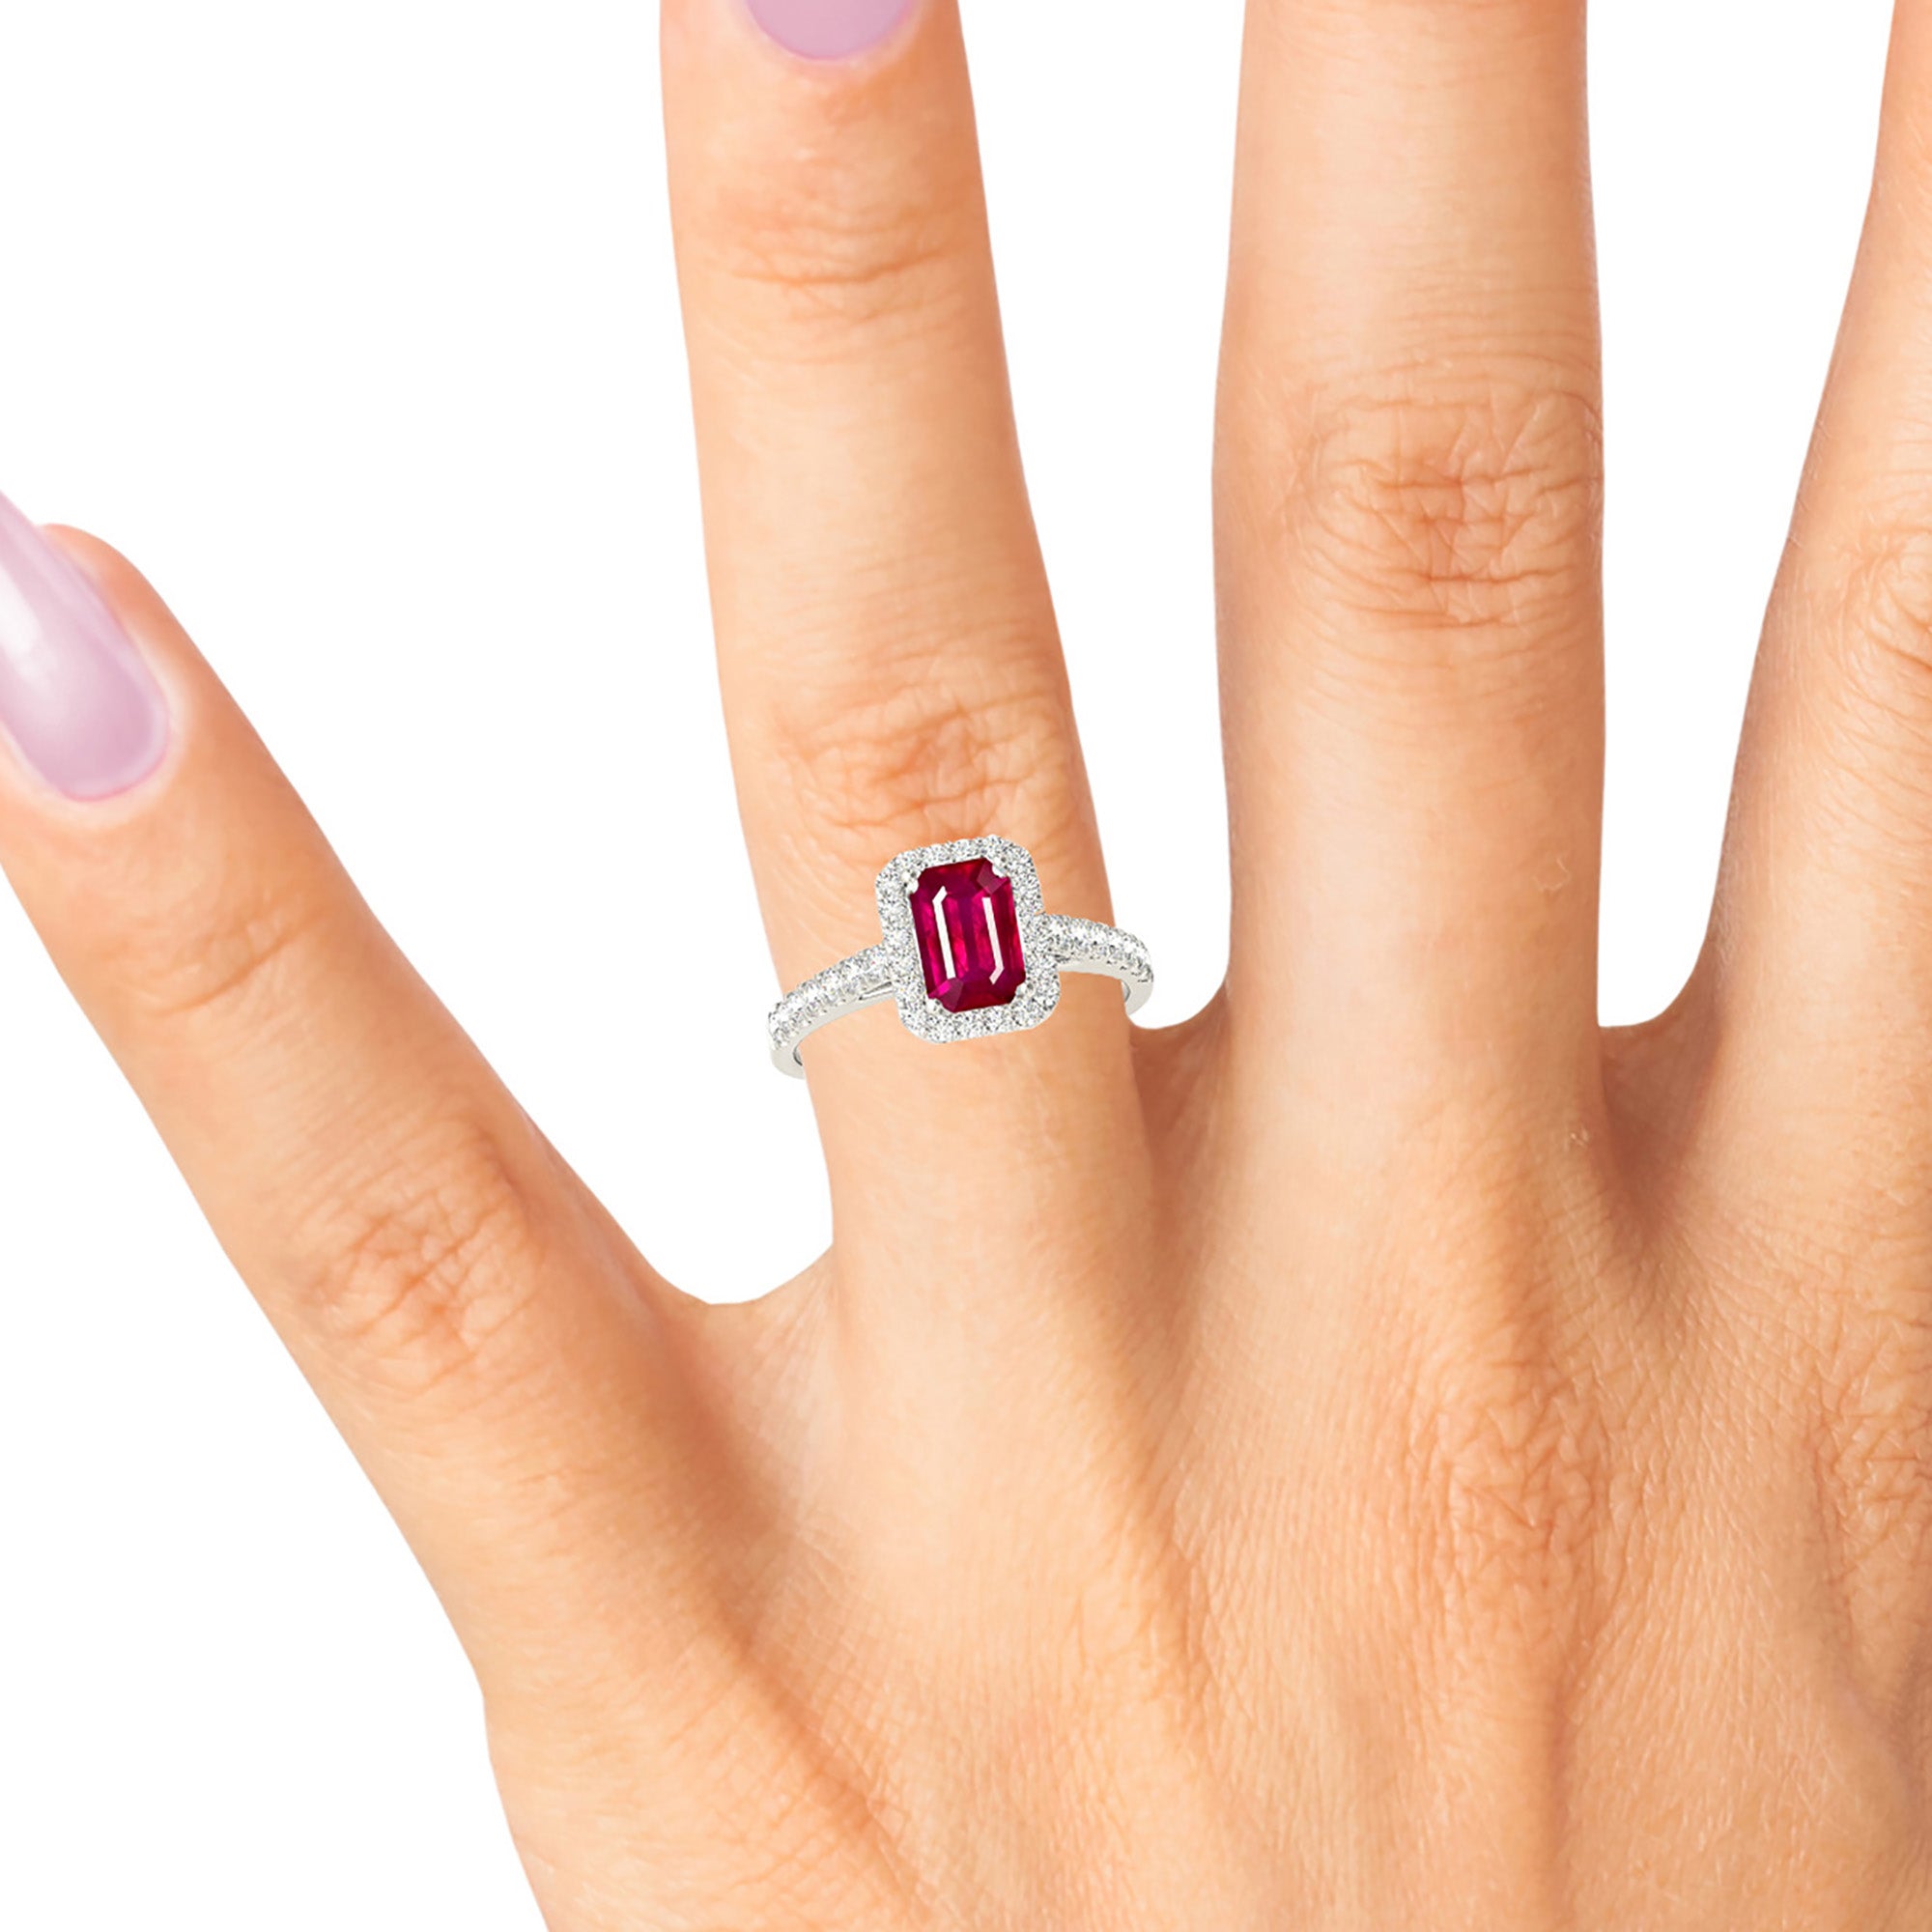 1.20 ct. Genuine Emerald Cut Ruby Ring With 0.25 ctw. Diamond Halo And Delicate Diamond Band-in 14K/18K White, Yellow, Rose Gold and Platinum - Christmas Jewelry Gift -VIRABYANI